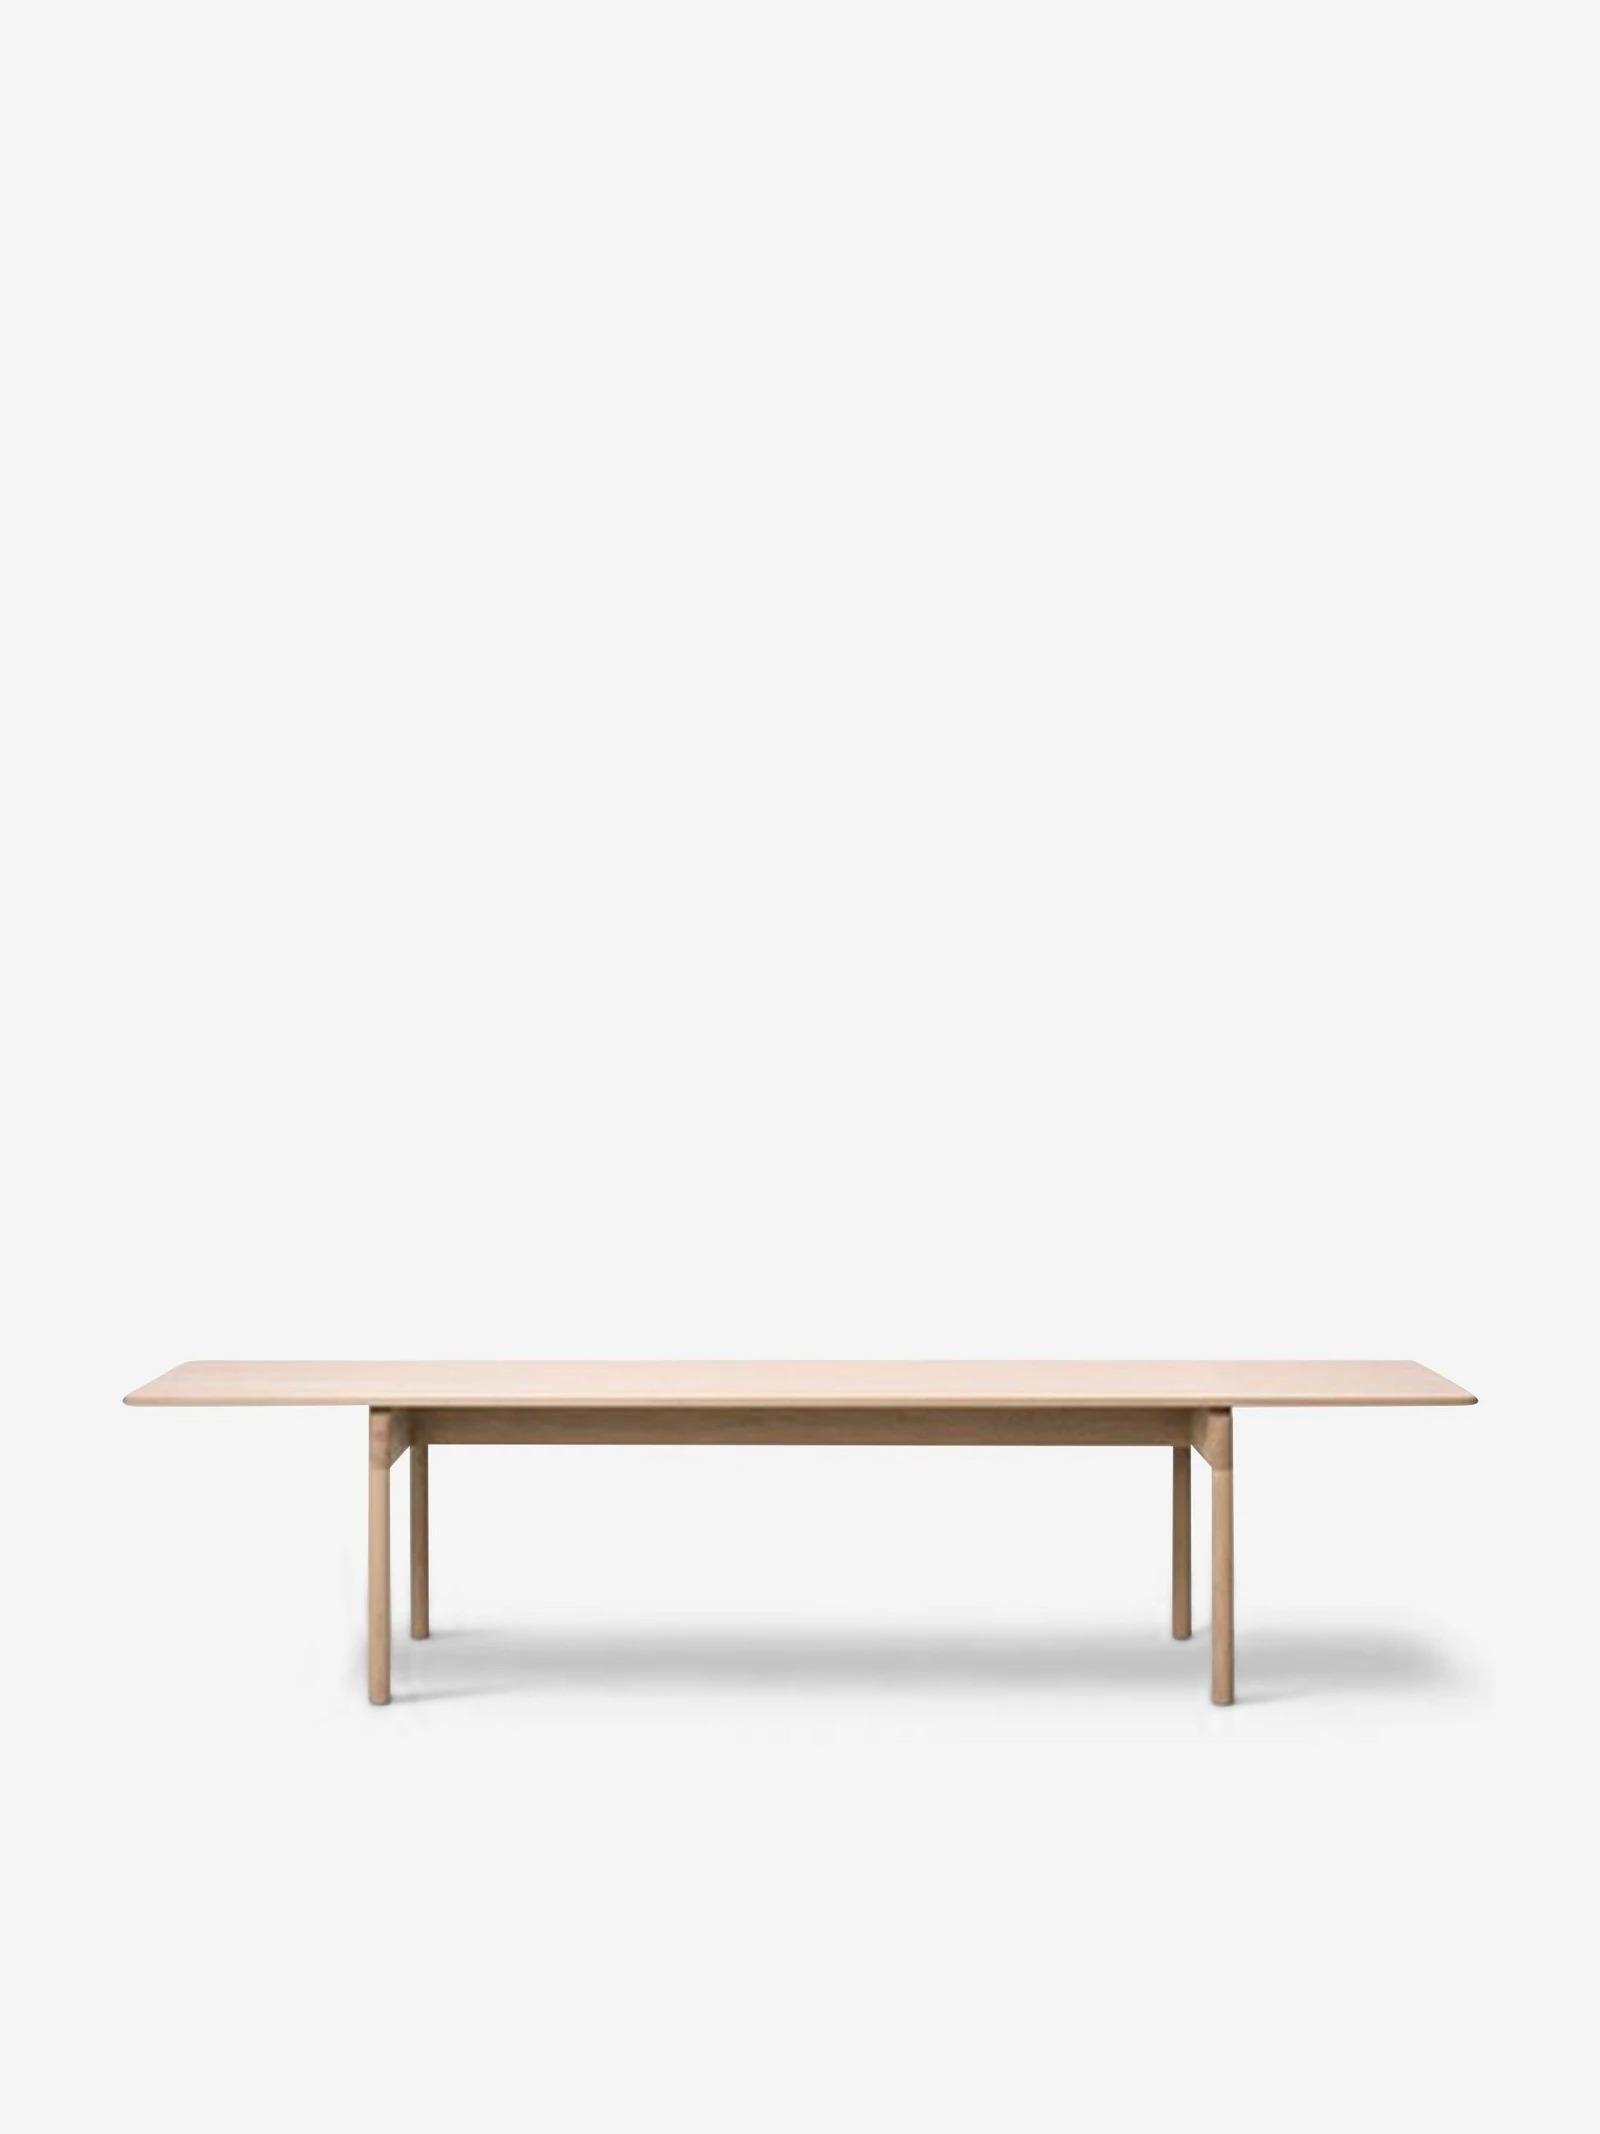 The Post Table illustrates the idea of eliminating anything extra to solely focus on the essential. A classic design expressed with modern minimalism, the table is made from solid oak, featuring loads of legroom in the wide space between the legs on